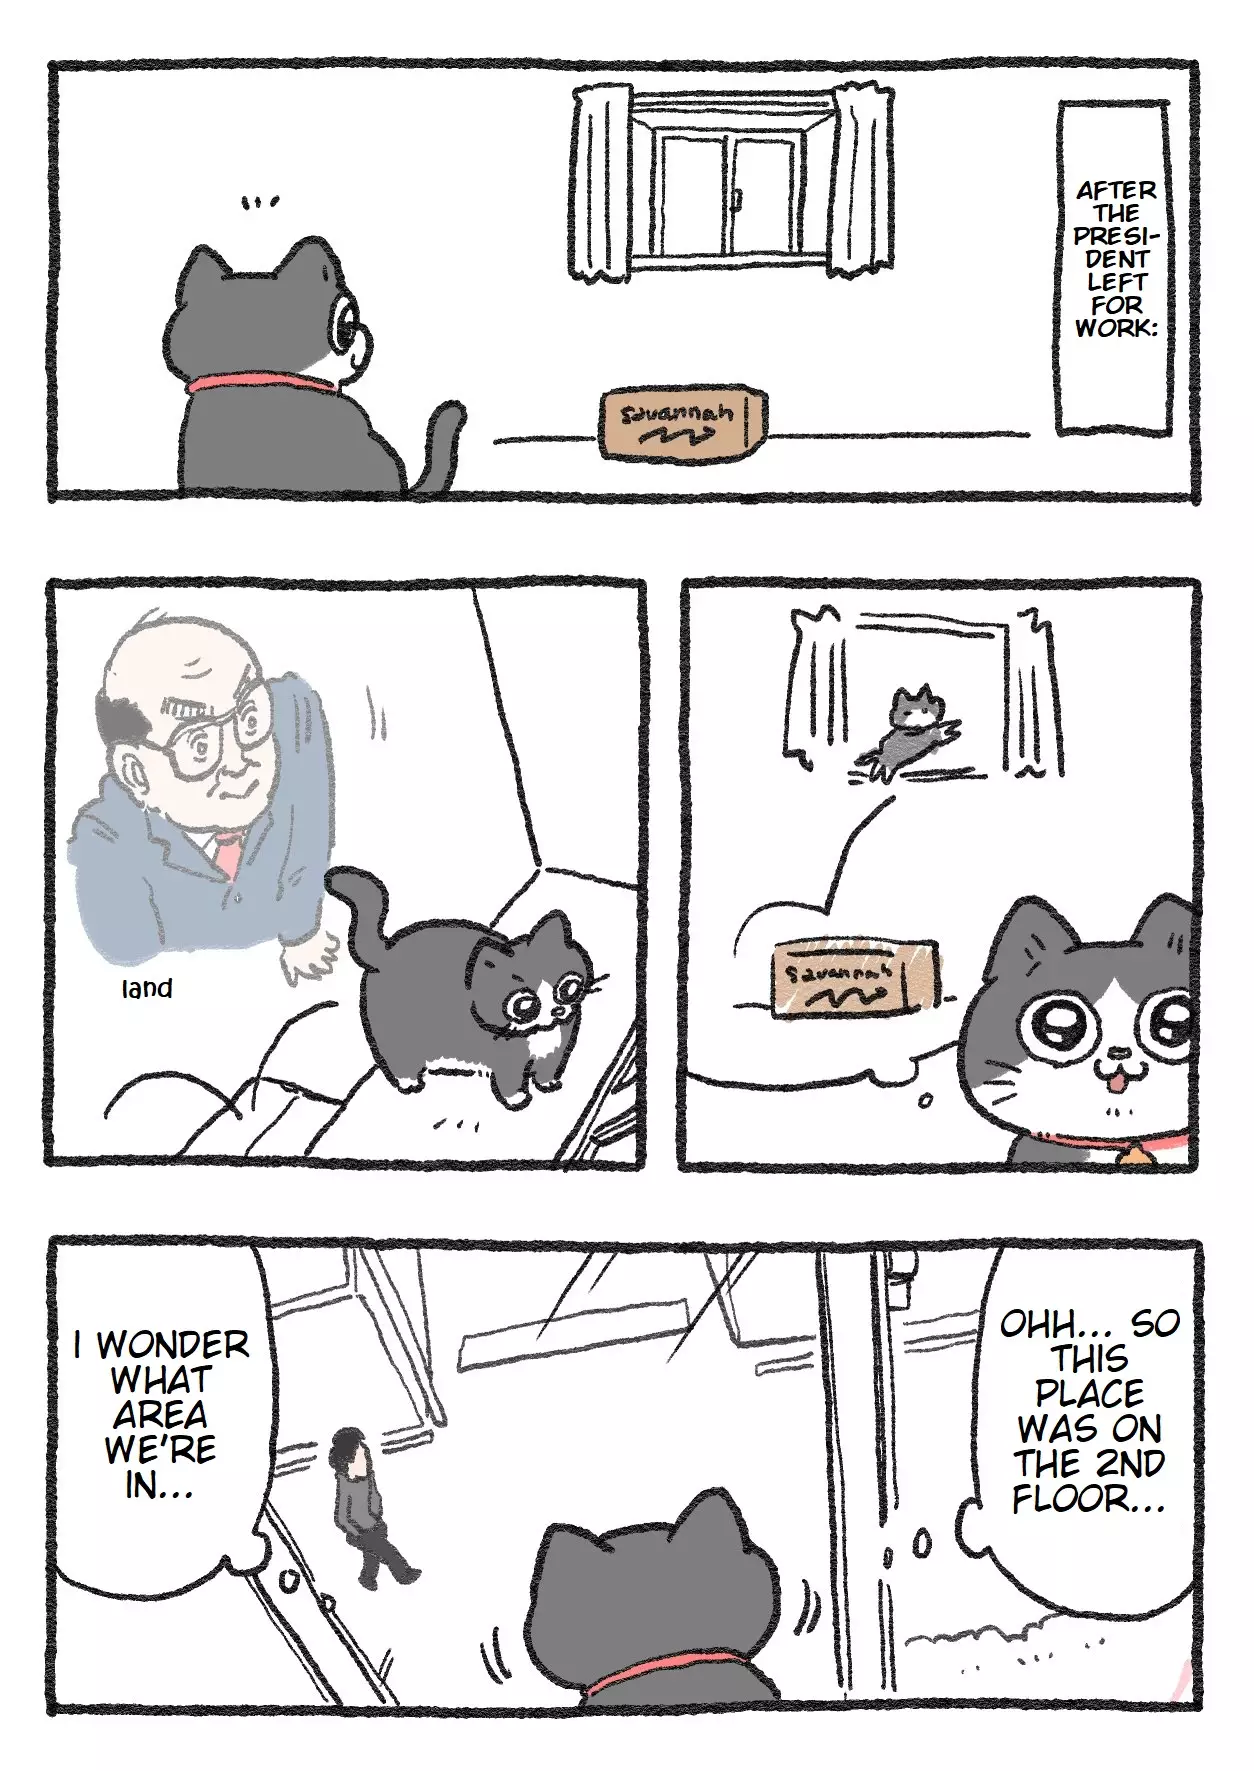 The Old Man Who Was Reincarnated As A Cat - 109 page 1-531053be